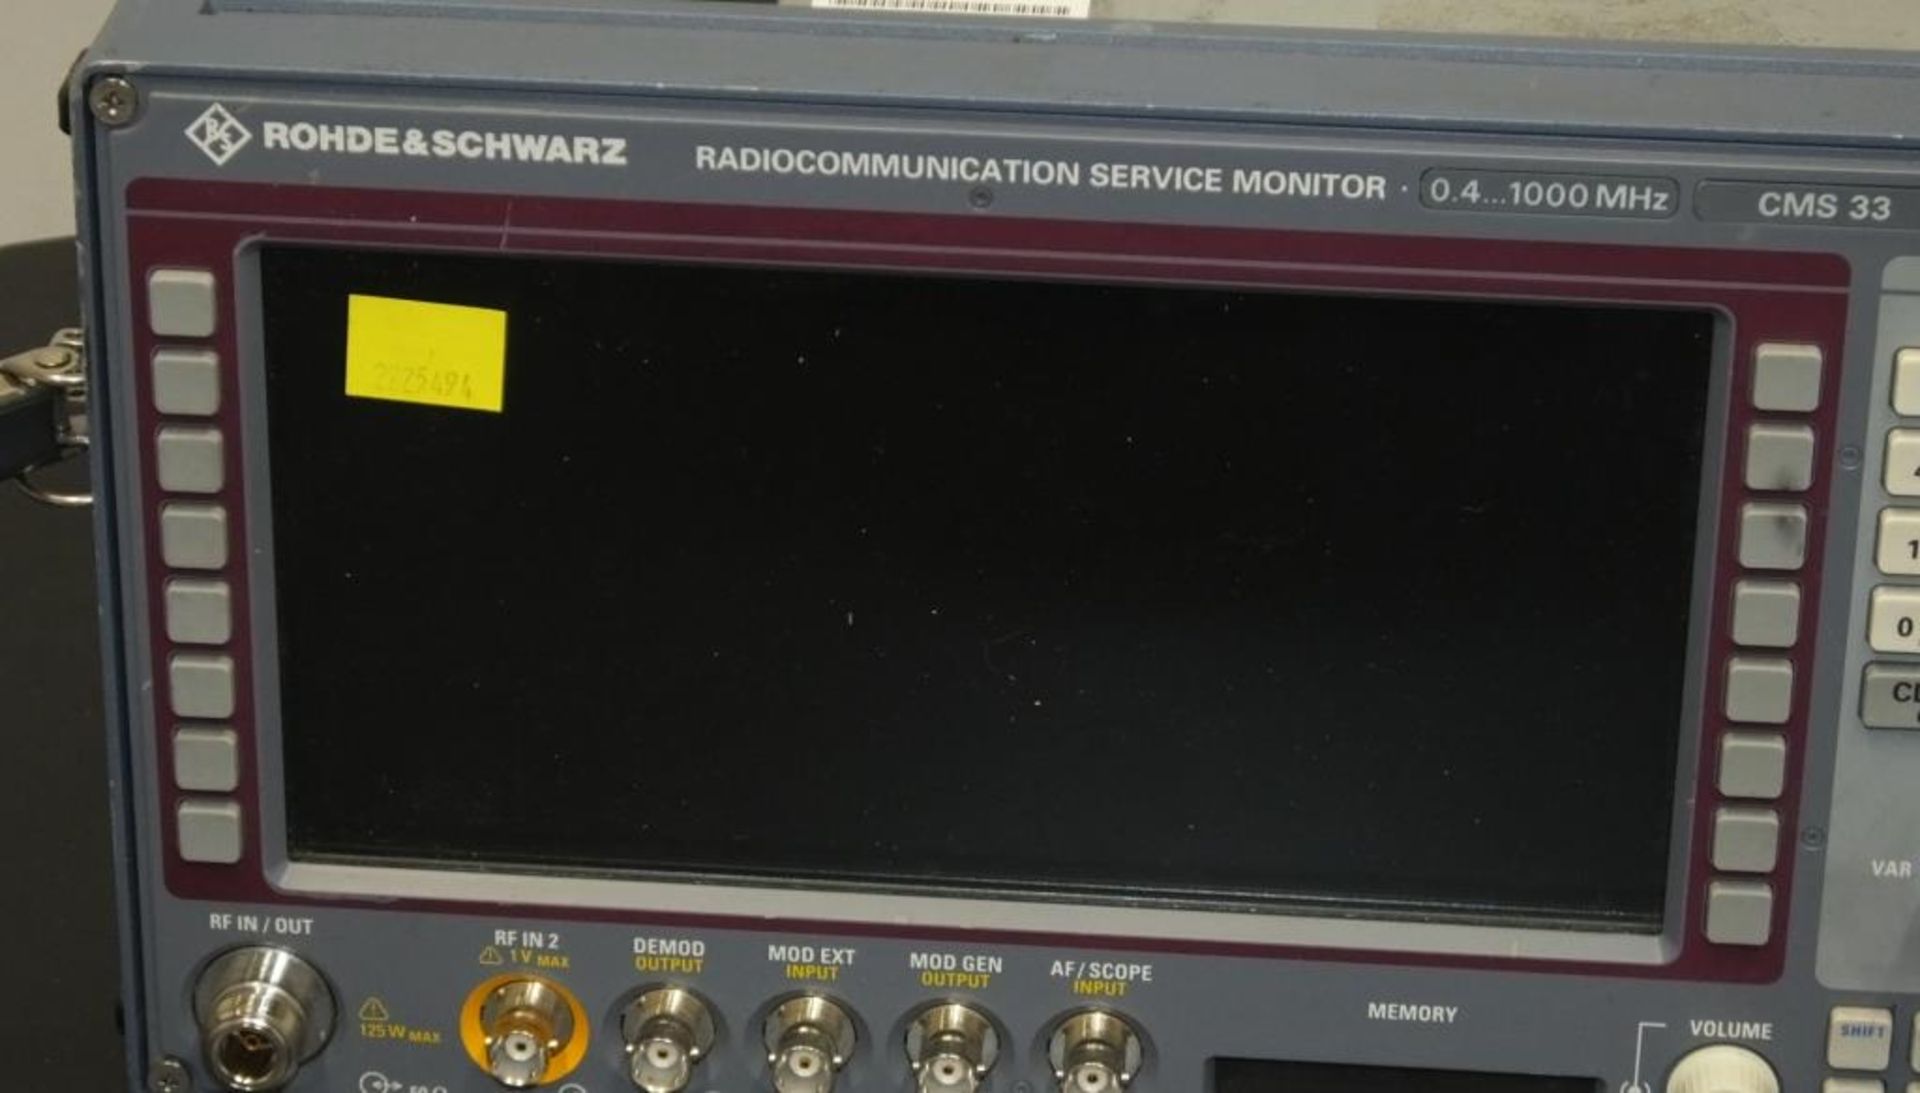 Rohde & Schwarz Radio Communications monitor 0.4 - 1000mhz - CMS33 - 840.0009.34, antenna base in co - Image 3 of 18